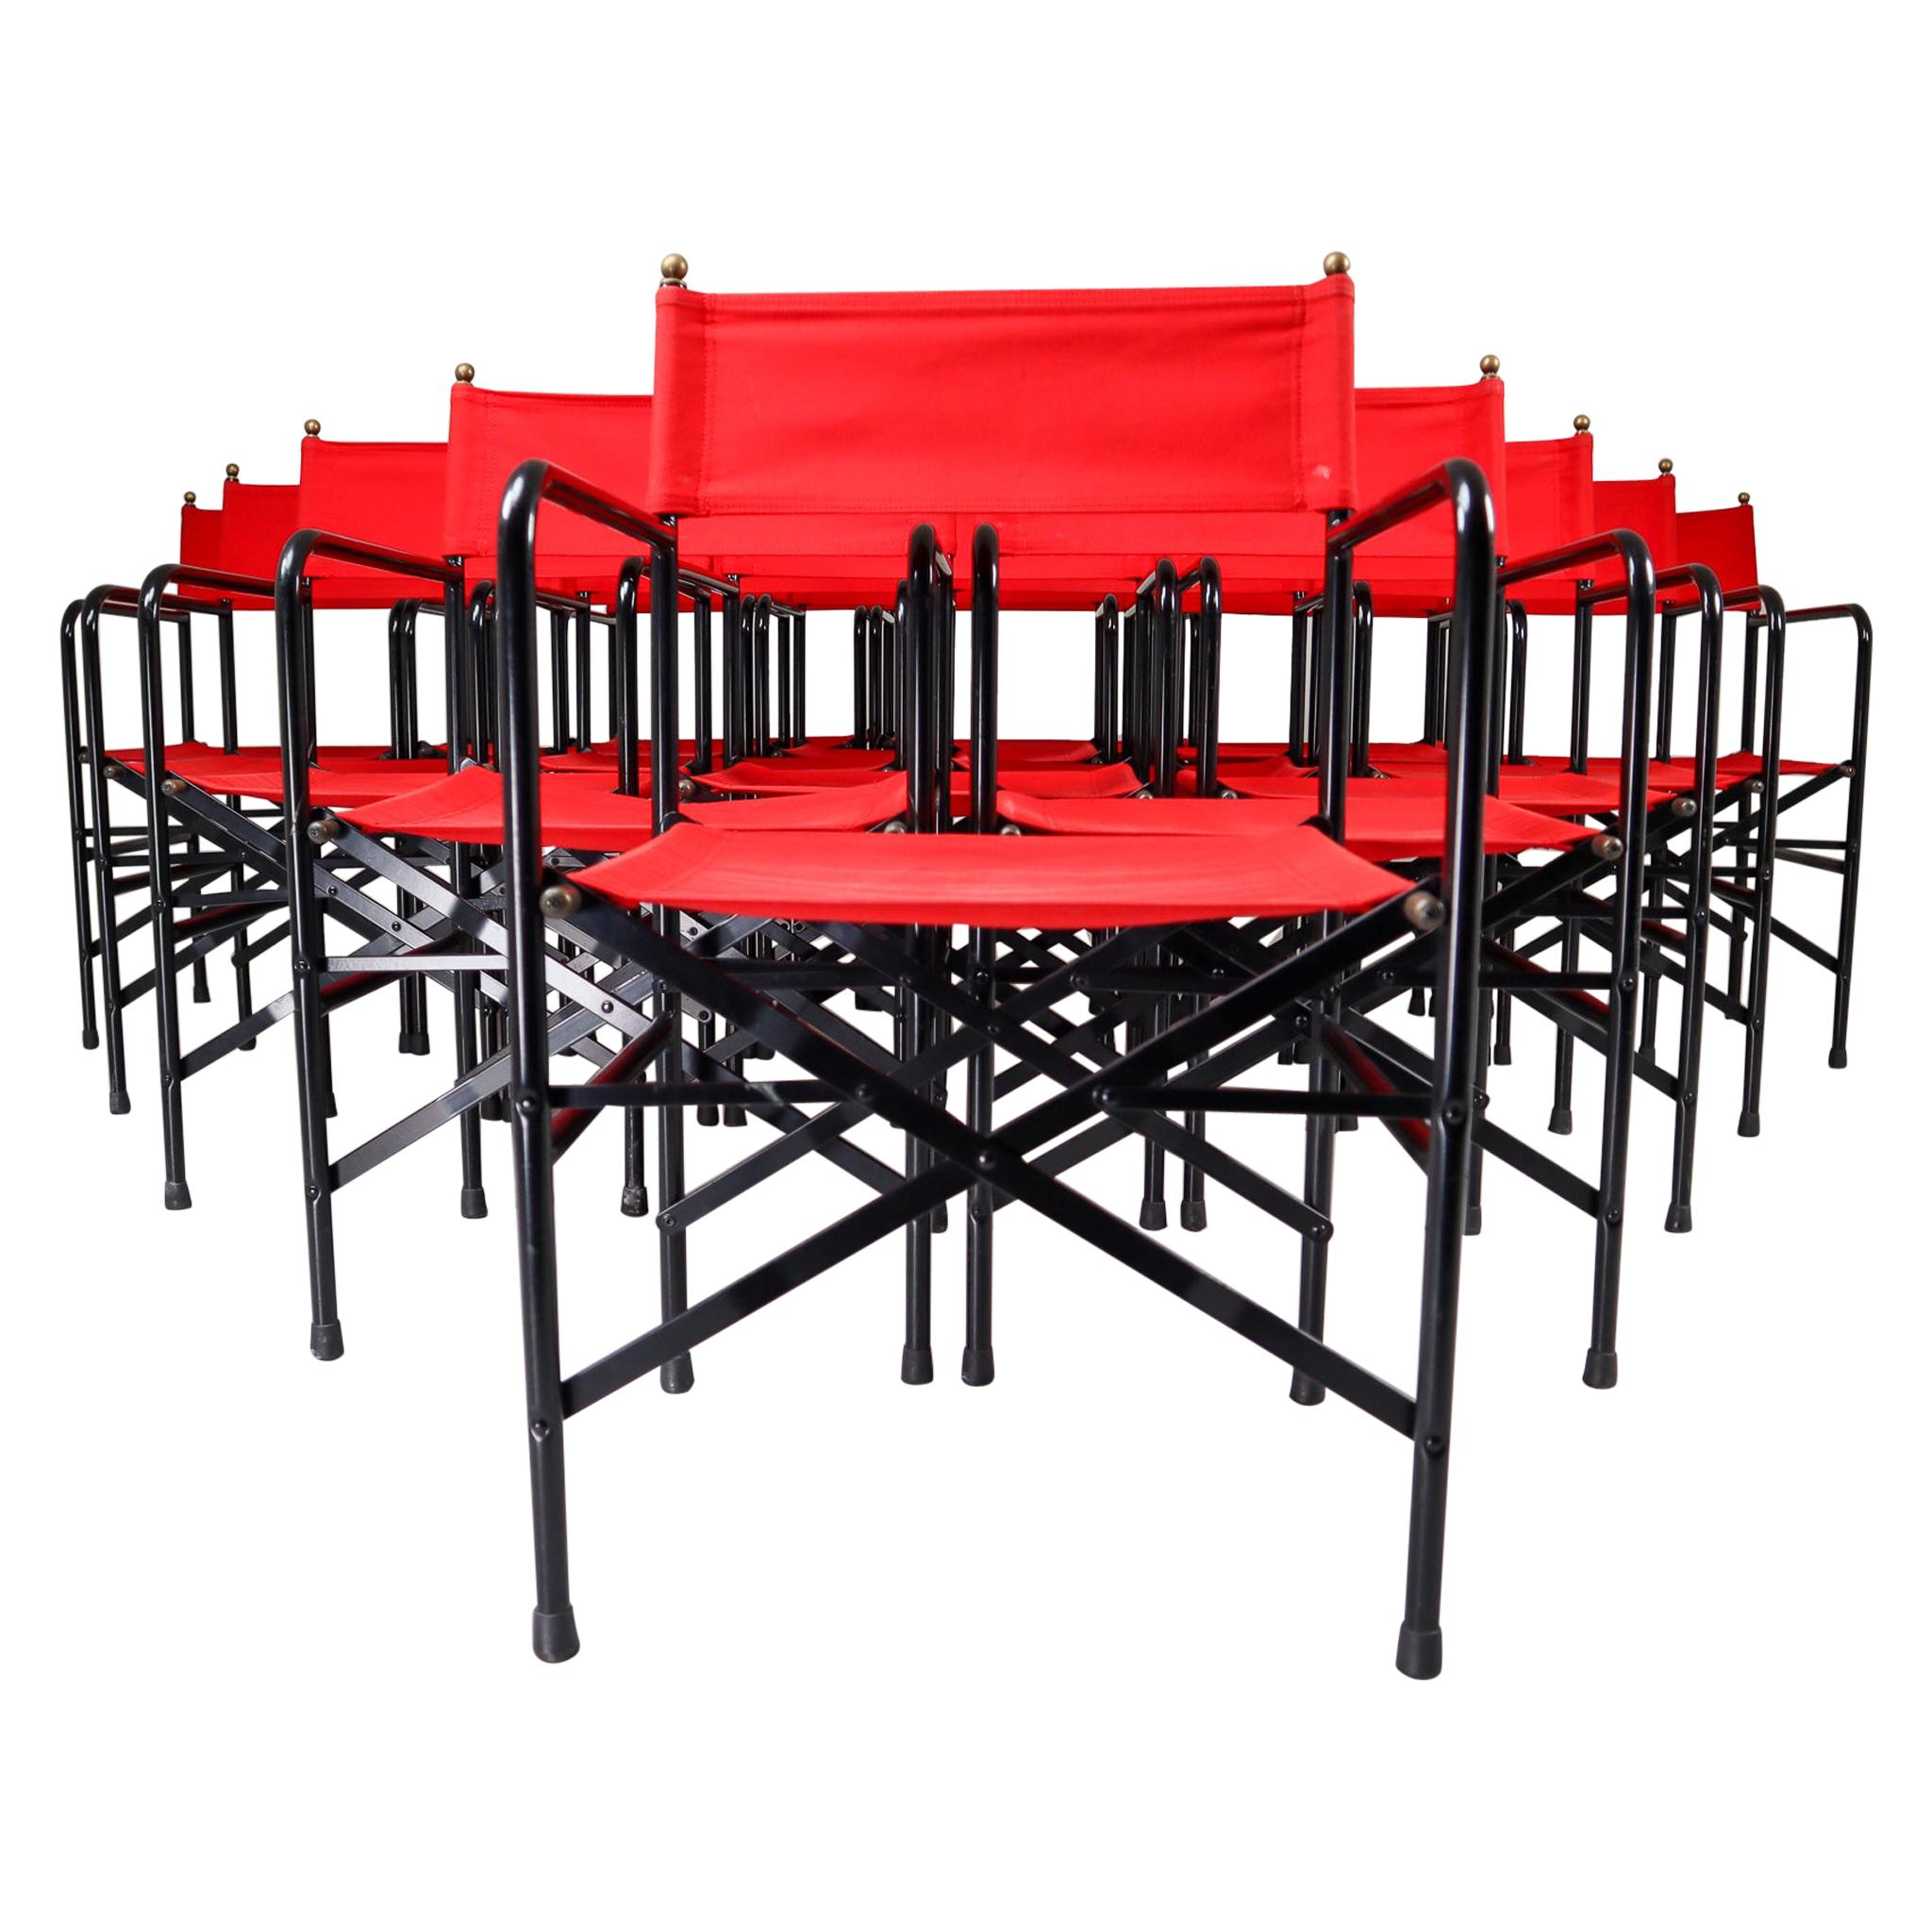 18 Venetian Folding-Patio-Garden Chairs in Steel, Brass and Red Fabric, 1980s For Sale